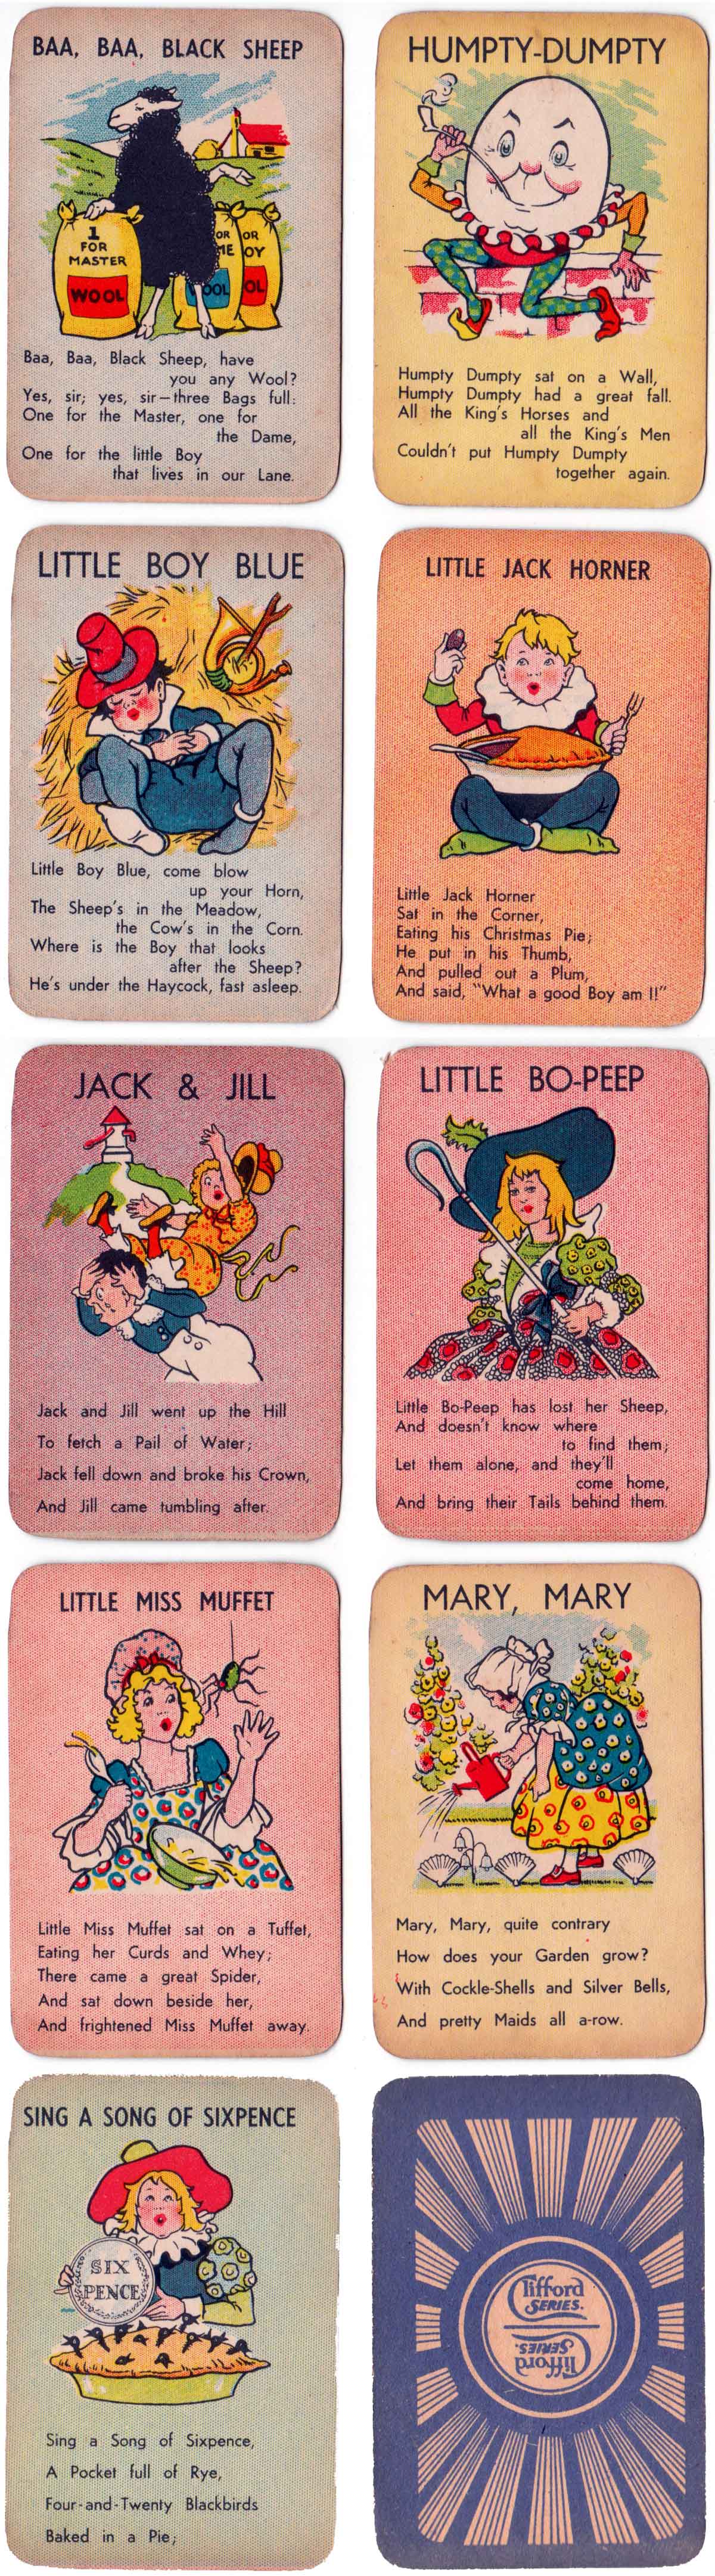 Clifford Series Snap Cards, c.1950